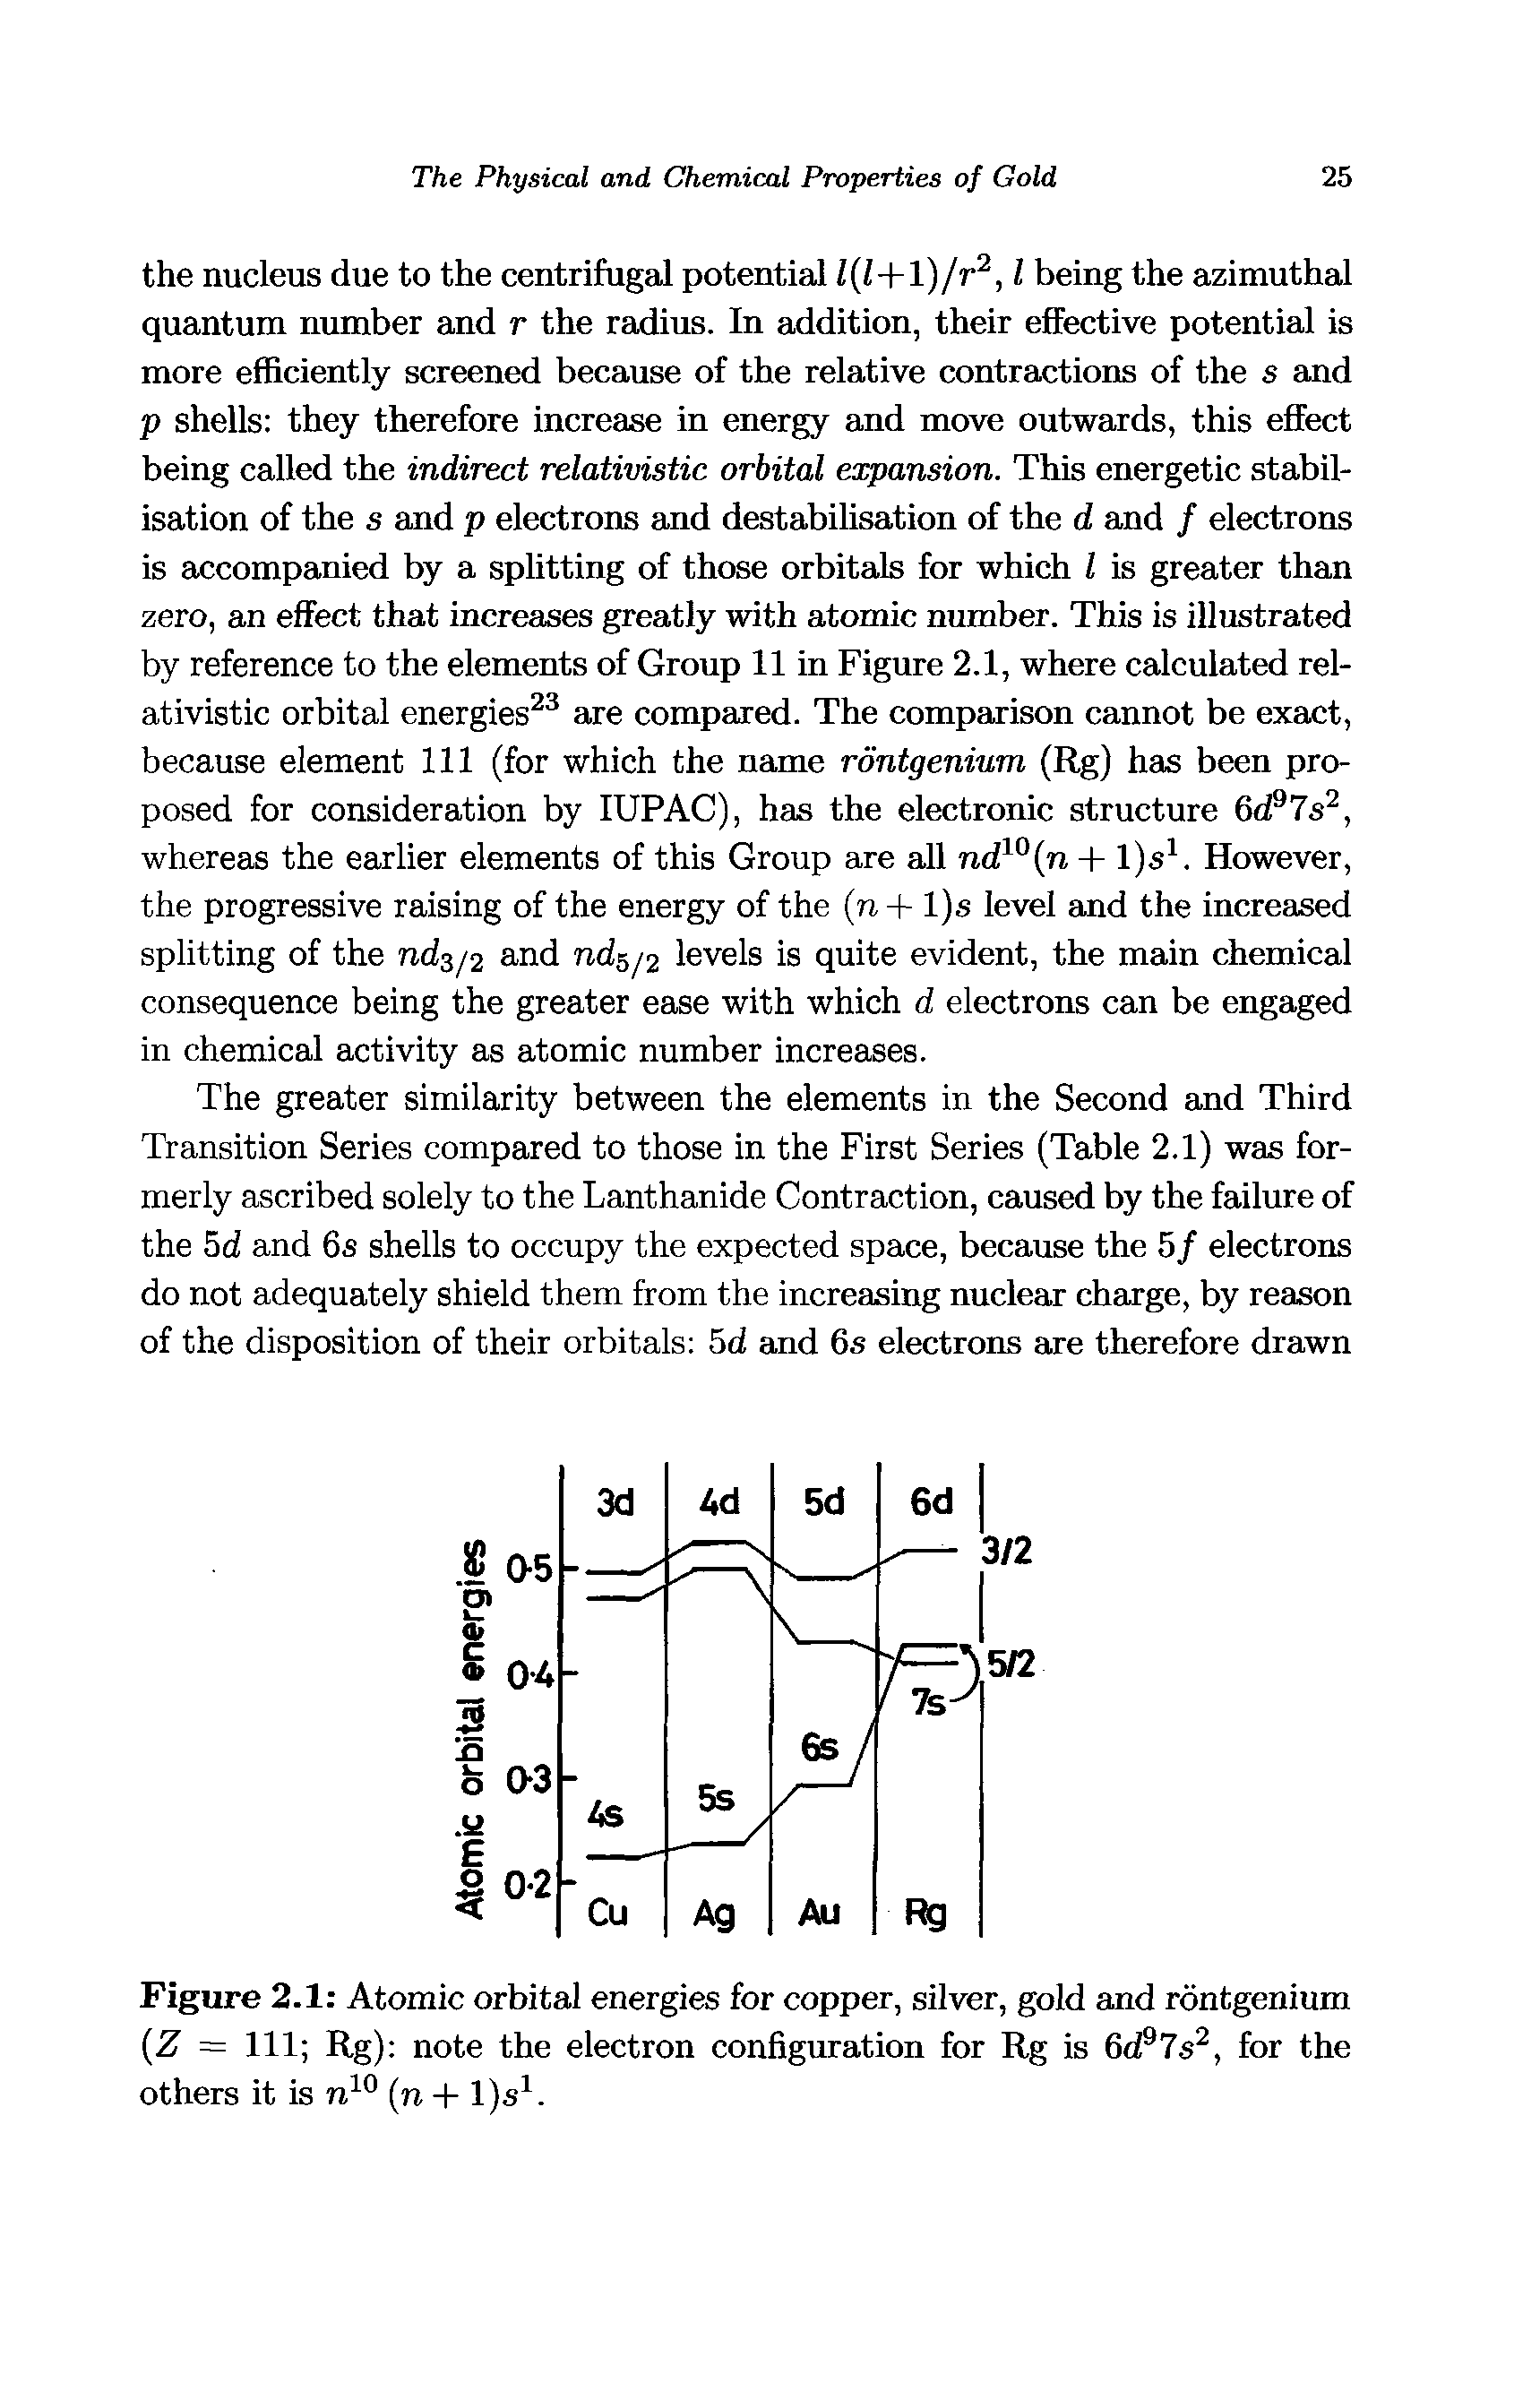 Figure 2.1 Atomic orbital energies for copper, silver, gold and rontgenium (Z = 111 Rg) note the electron configuration for Rg is 6d97.s2, for the others it is n10 (n + l)s1.